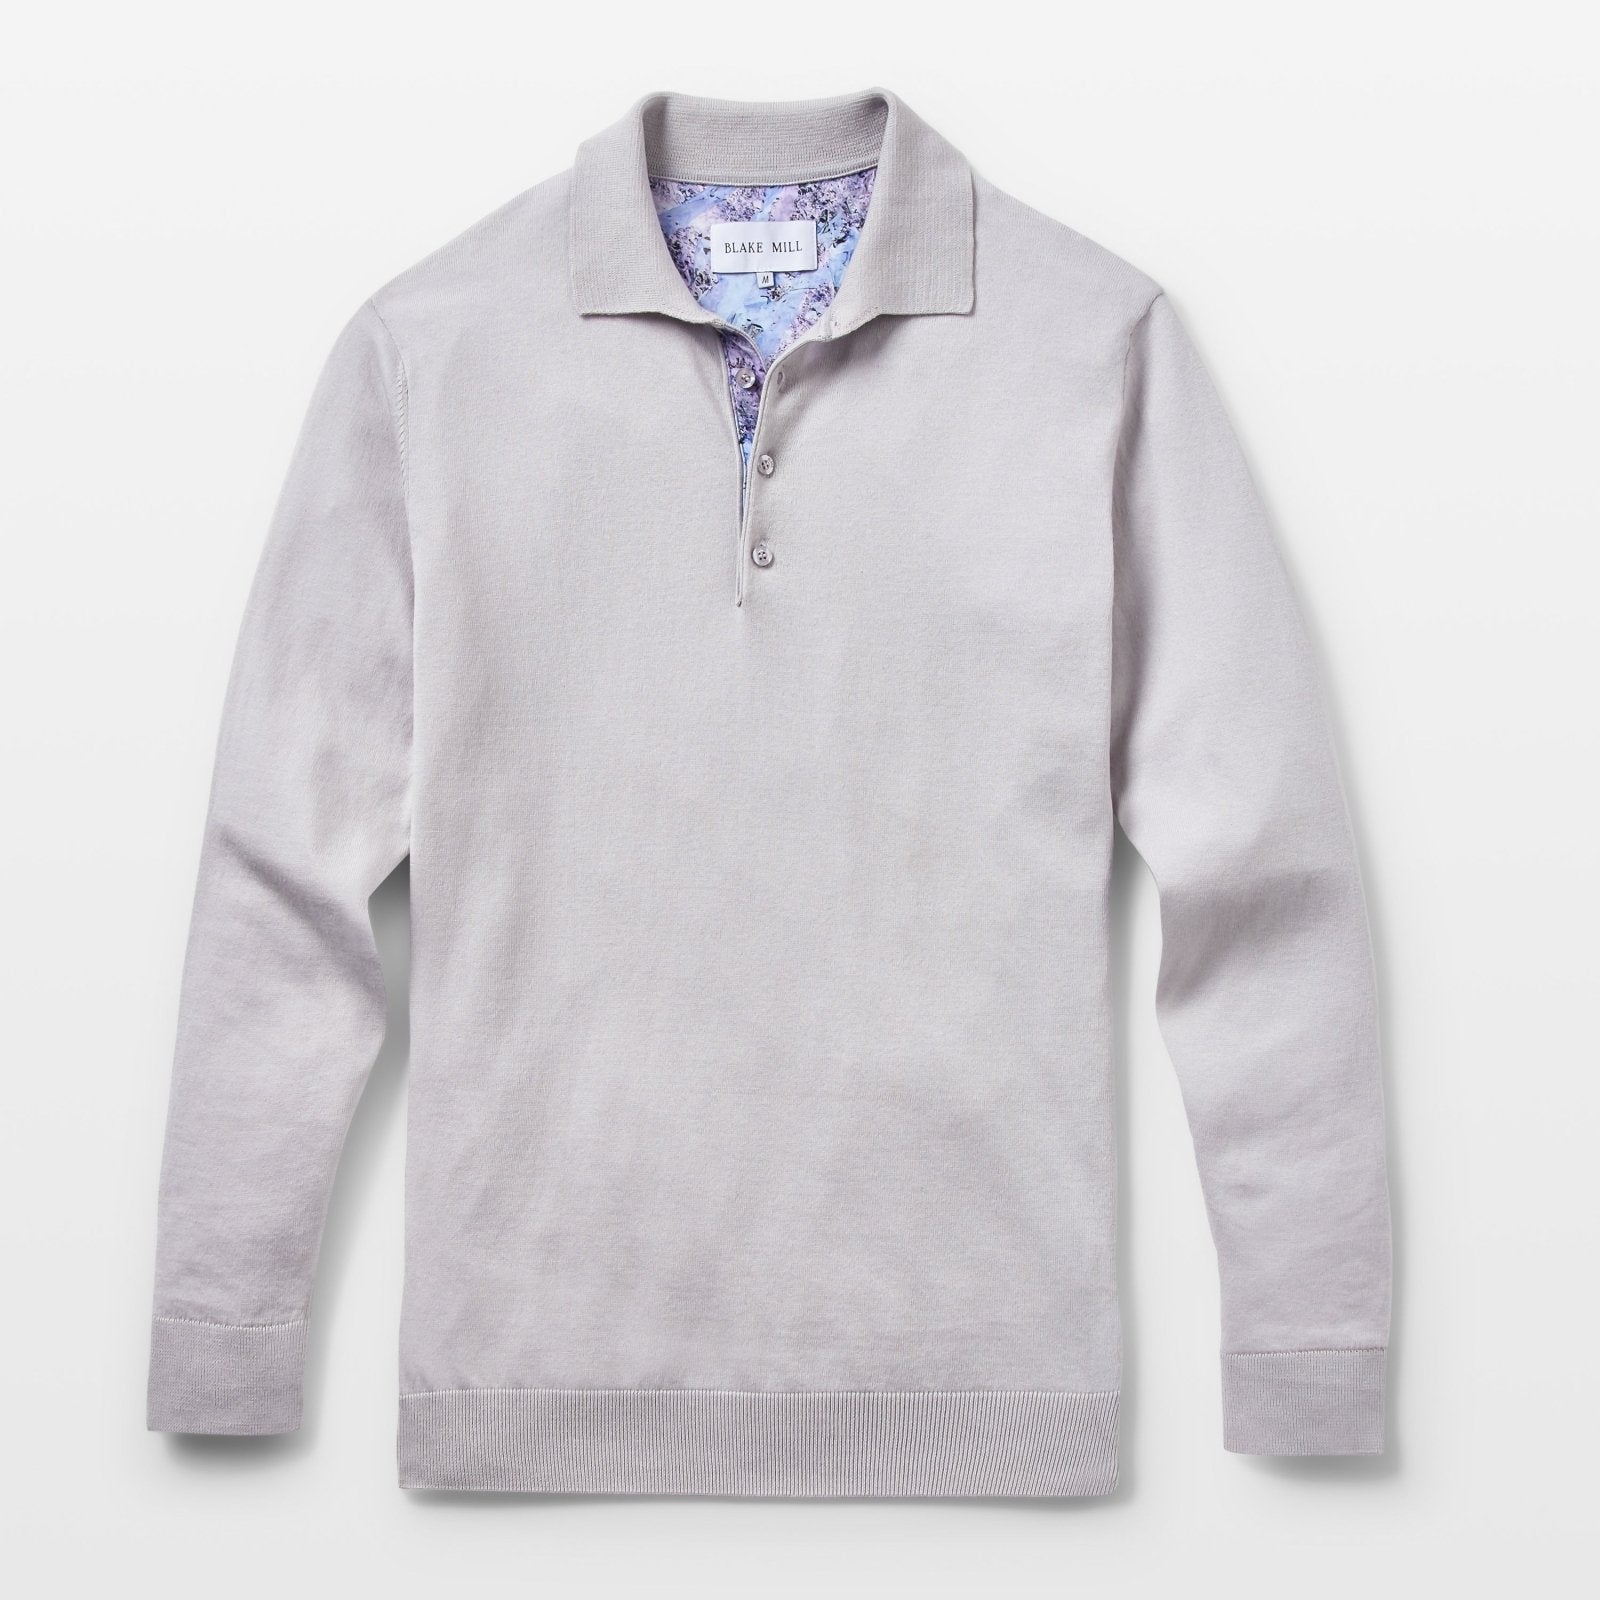 Grey Knit Polo with Times March Accents - Blake Mill